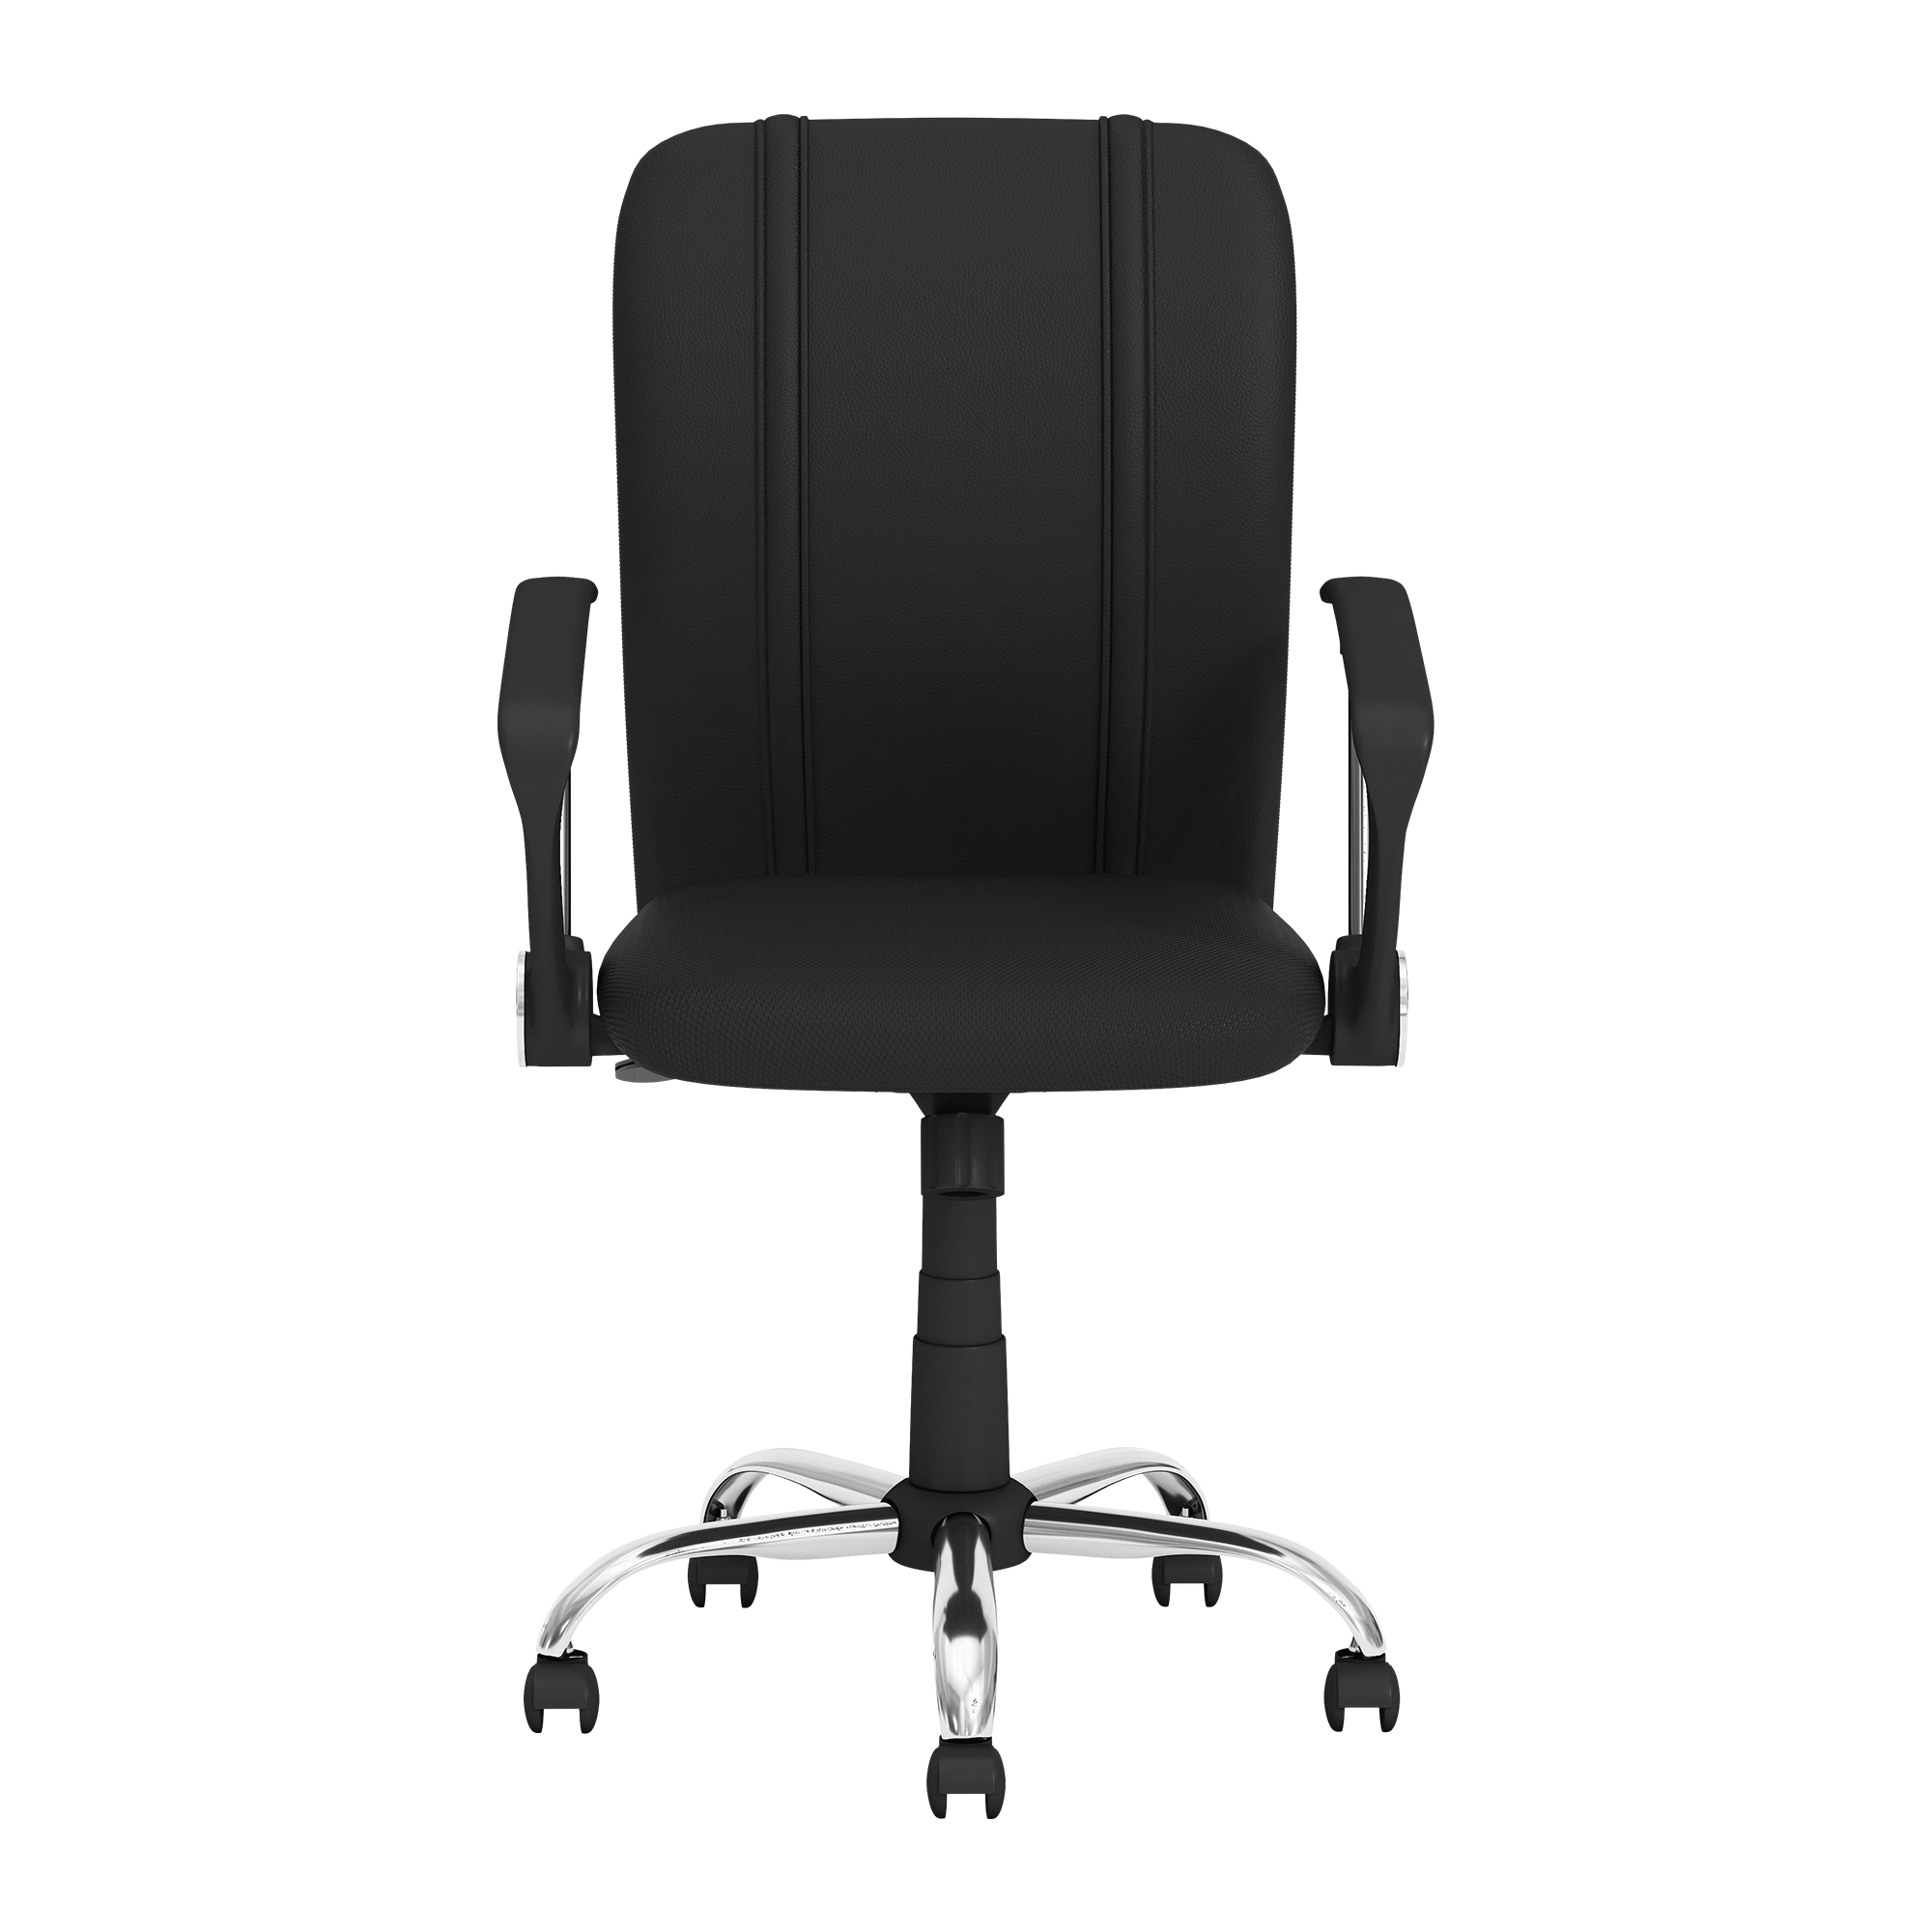 Curve Task Chair with St Louis Cardinals Cooperstown Primary